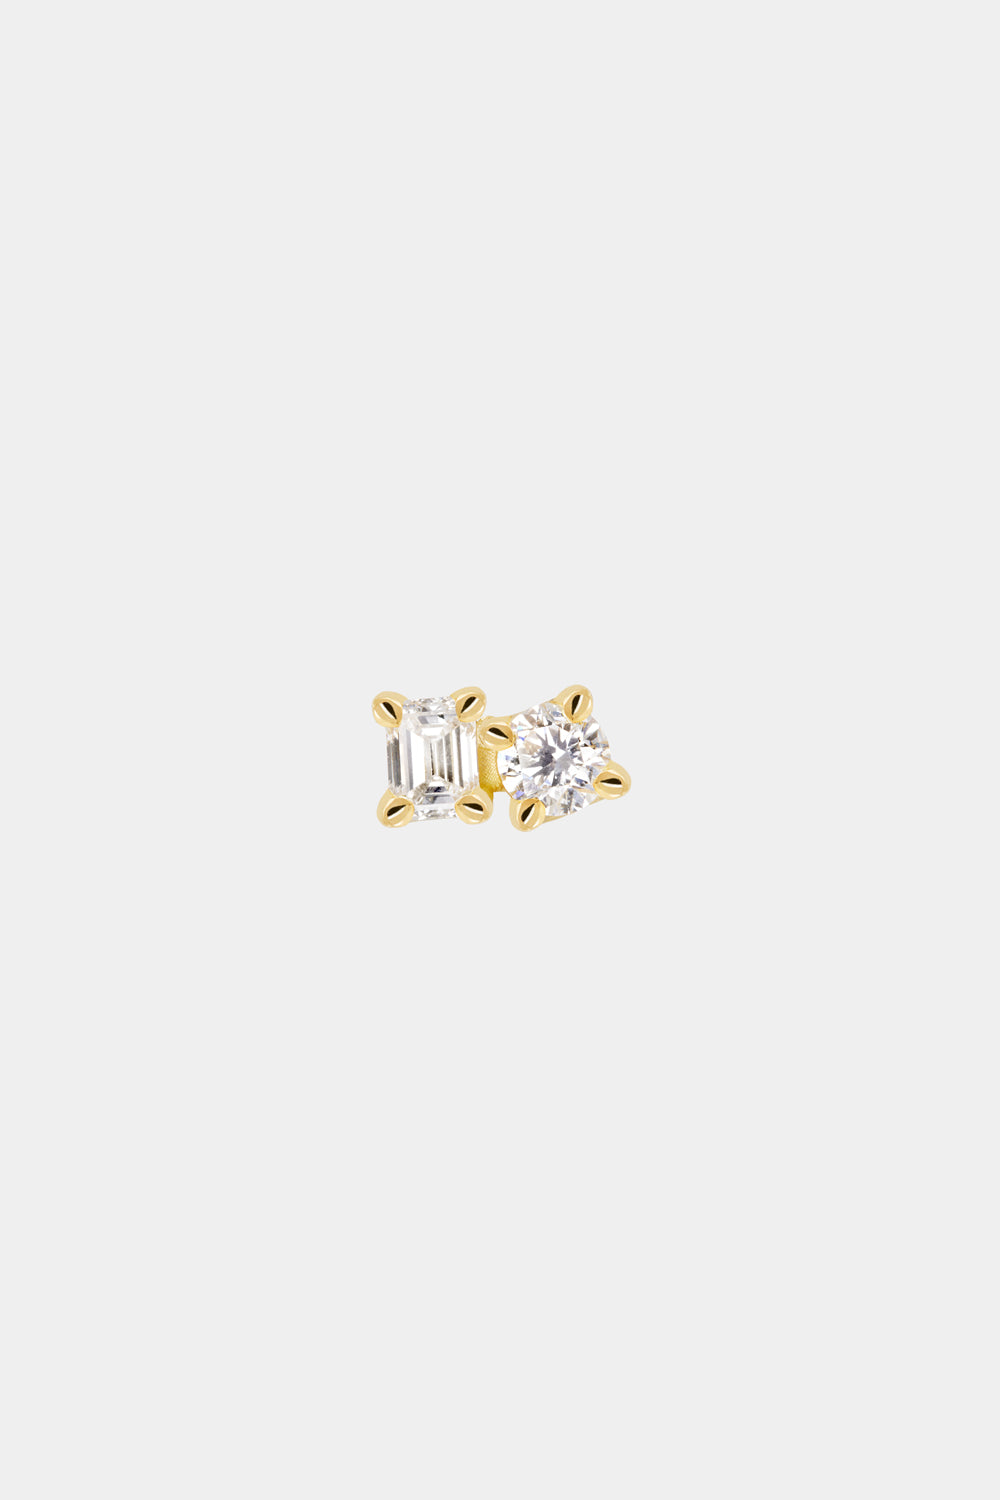 Toi et Moi Earring | 18K Yellow Gold, more diamond options available